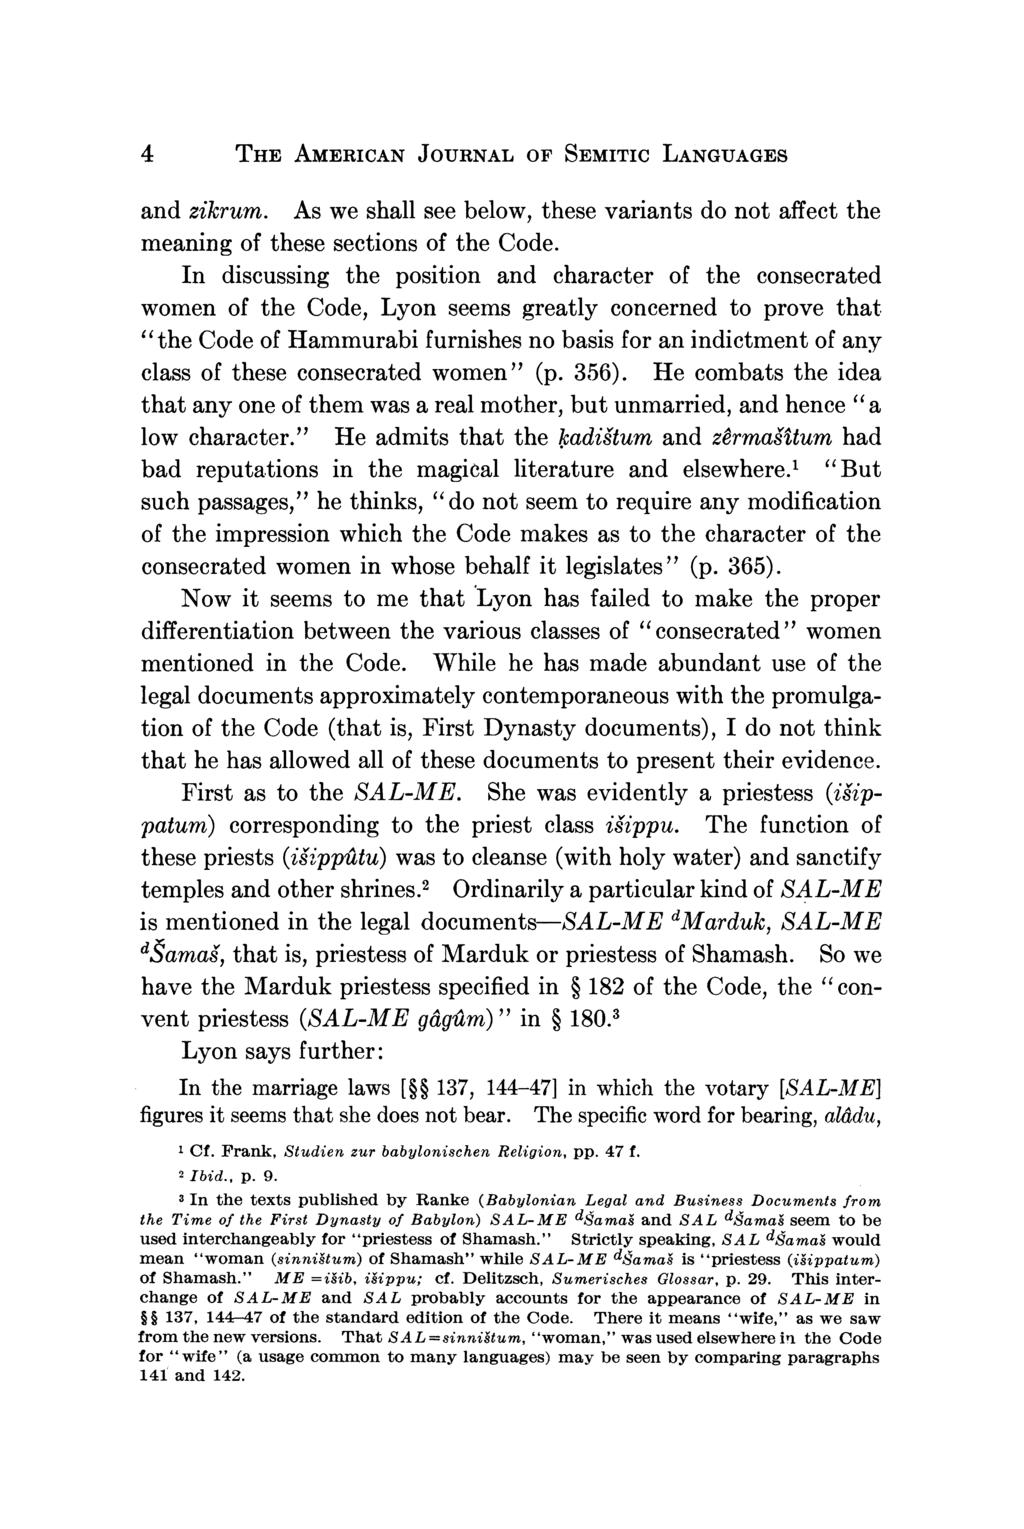 4 THE AMERICAN JOURNAL OF SEMITIC LANGUAGES and zikrum. As we shall see below, these variants do not affect the meaning of these sections of the Code.